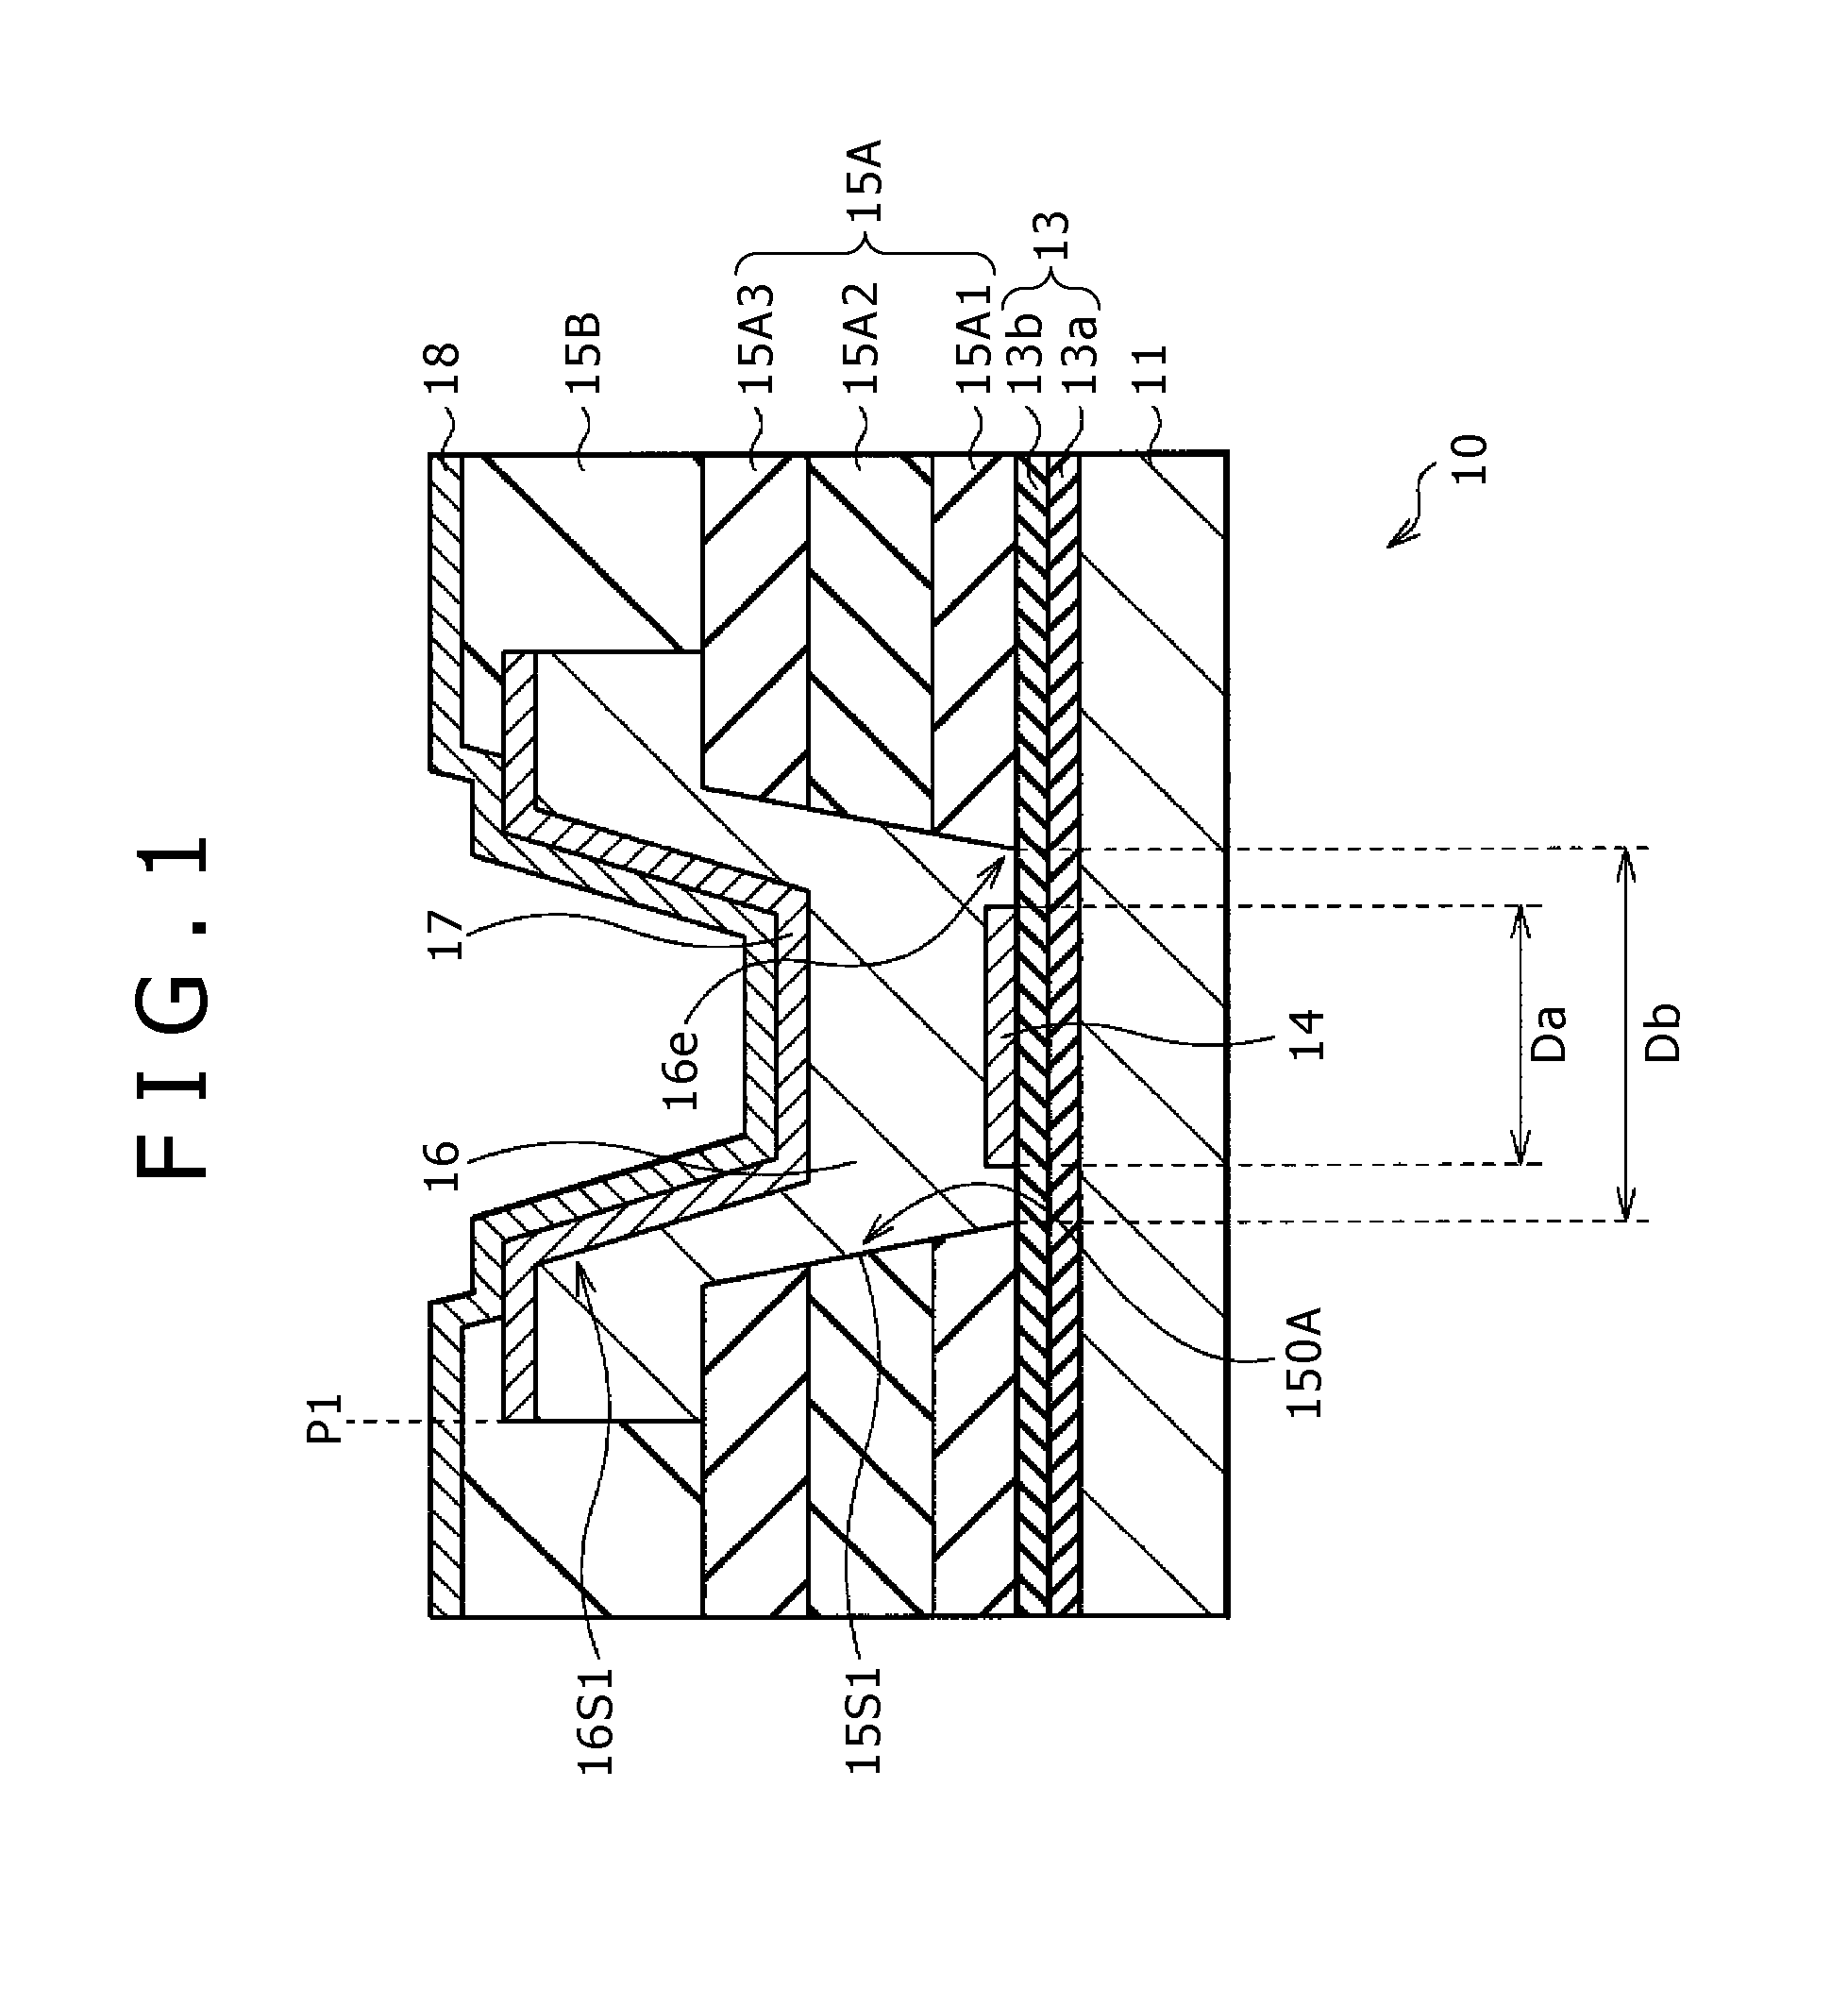 Photoelectric conversion element having a plurality of layered semiconductors and method for manufacturing same